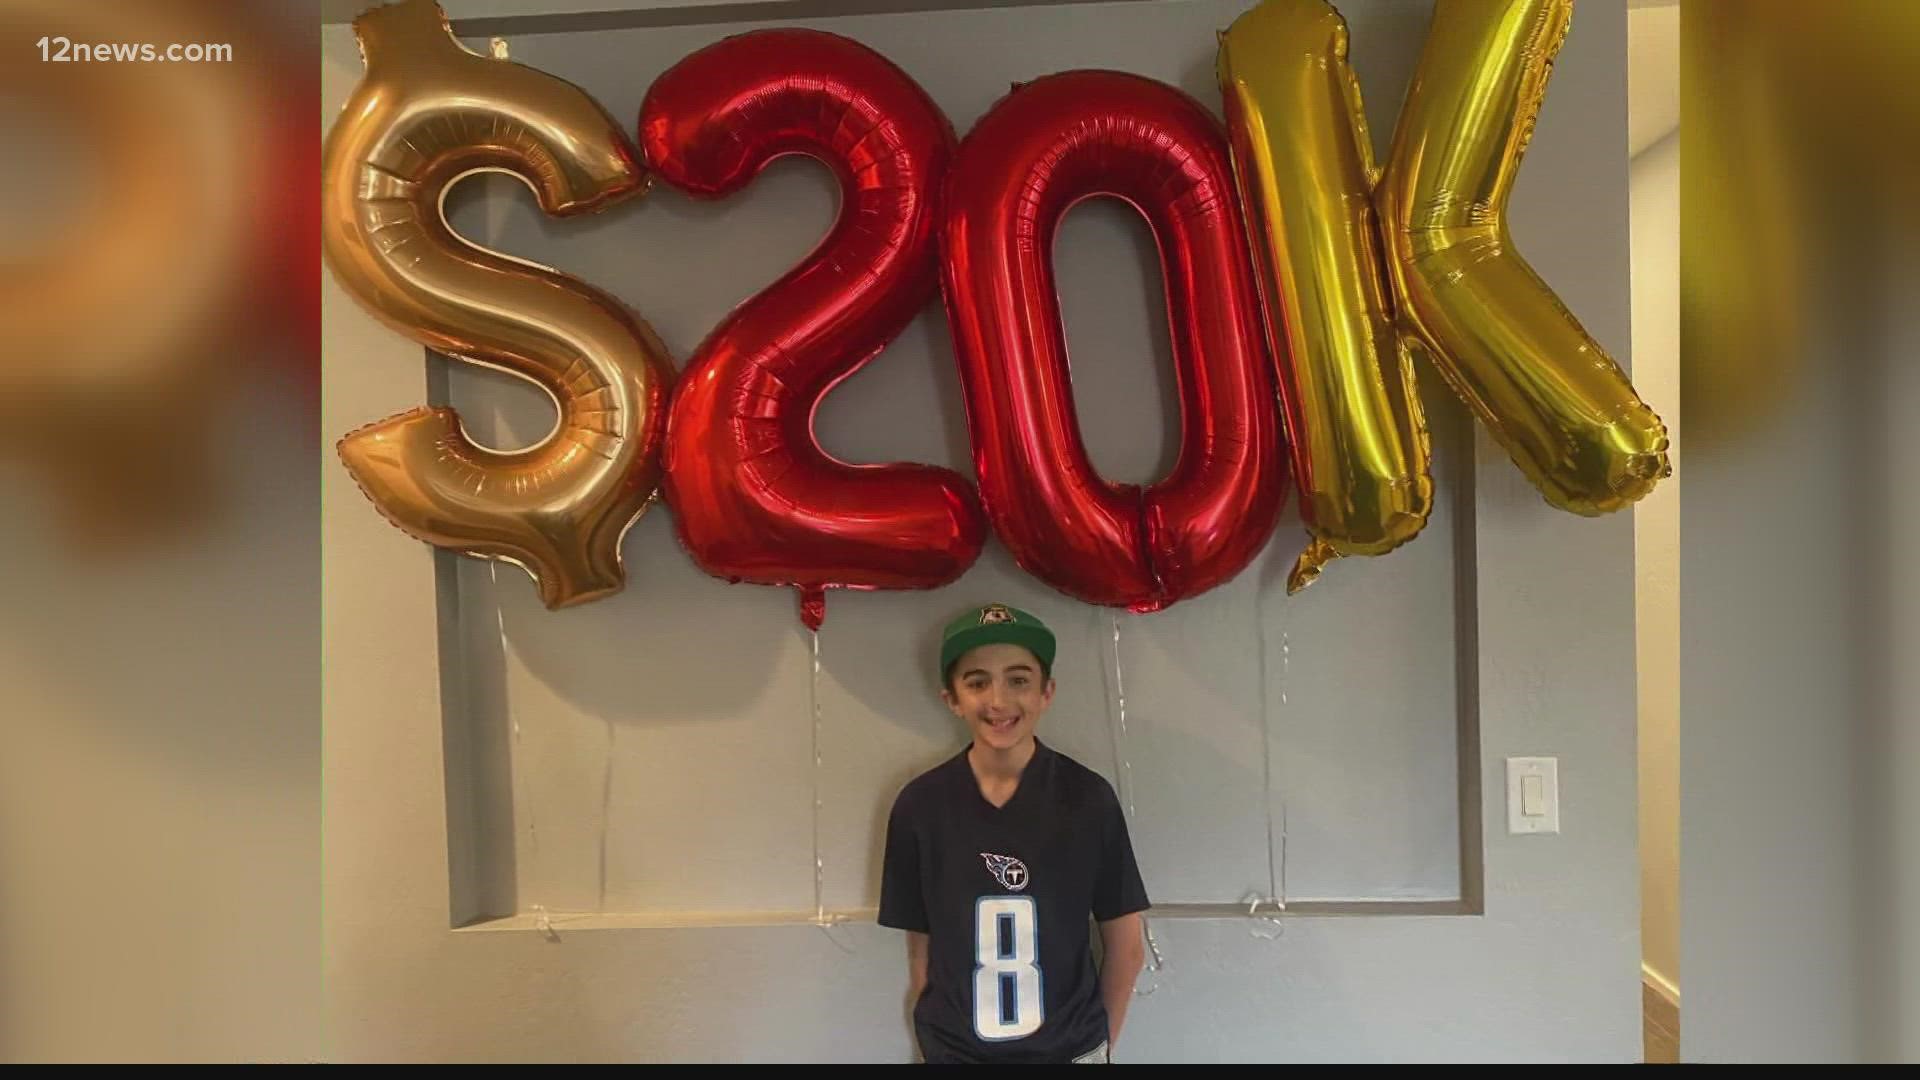 A Gilbert teenager has given up a decade of birthdays and raised more than $32,000 for cancer research because of it.